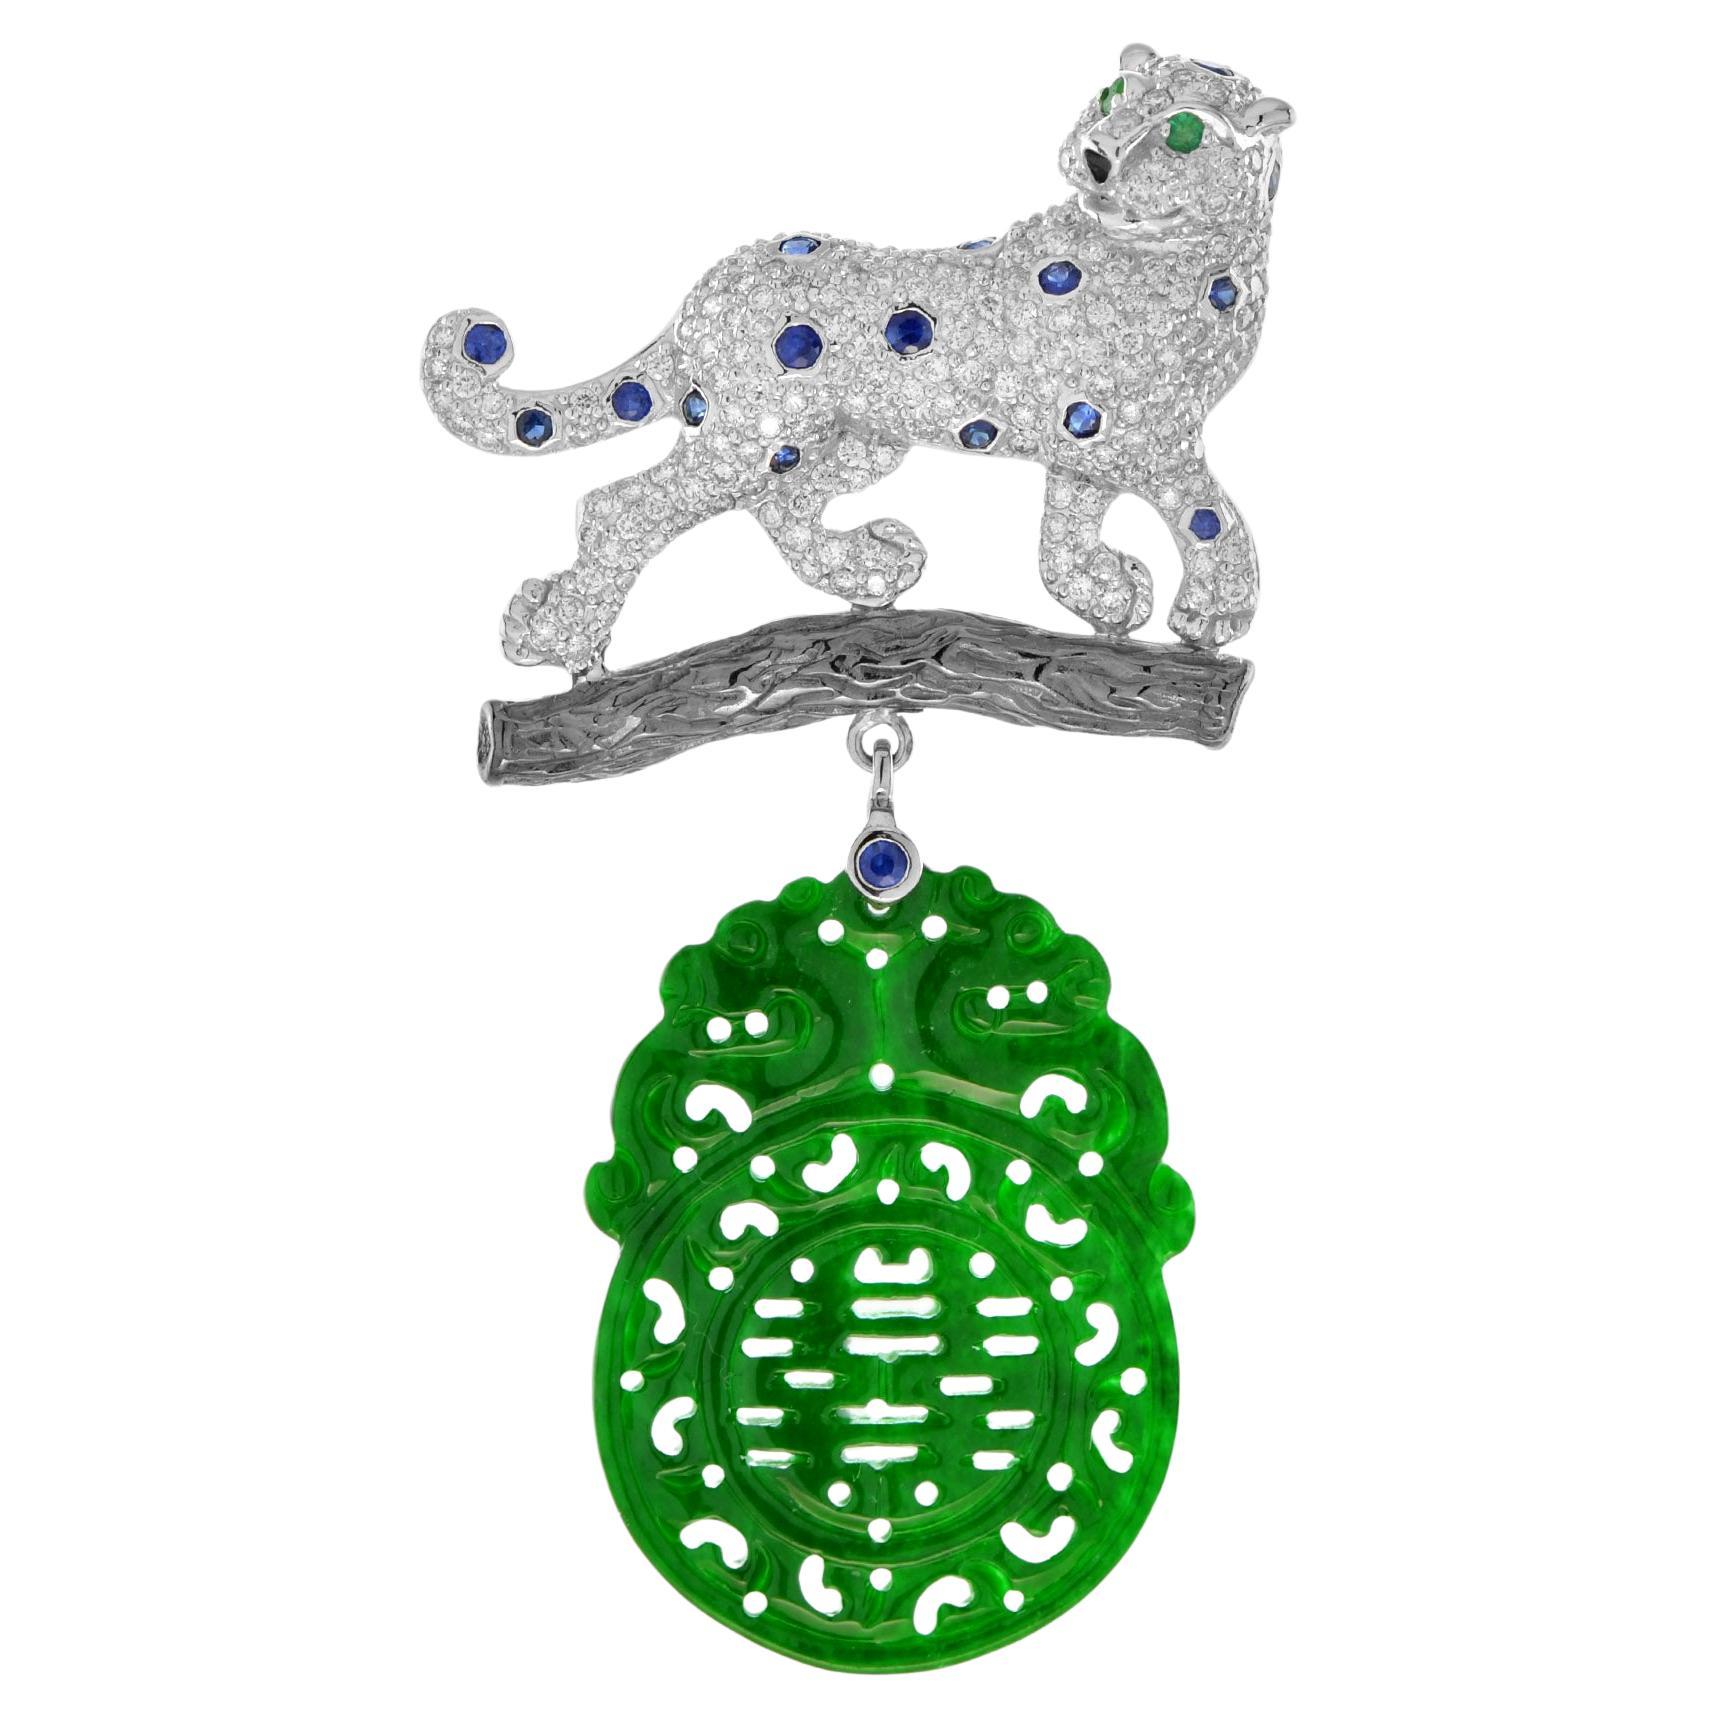 Carved Jade Diamond Sapphire Onyx Panther Brooch in 14k White Gold